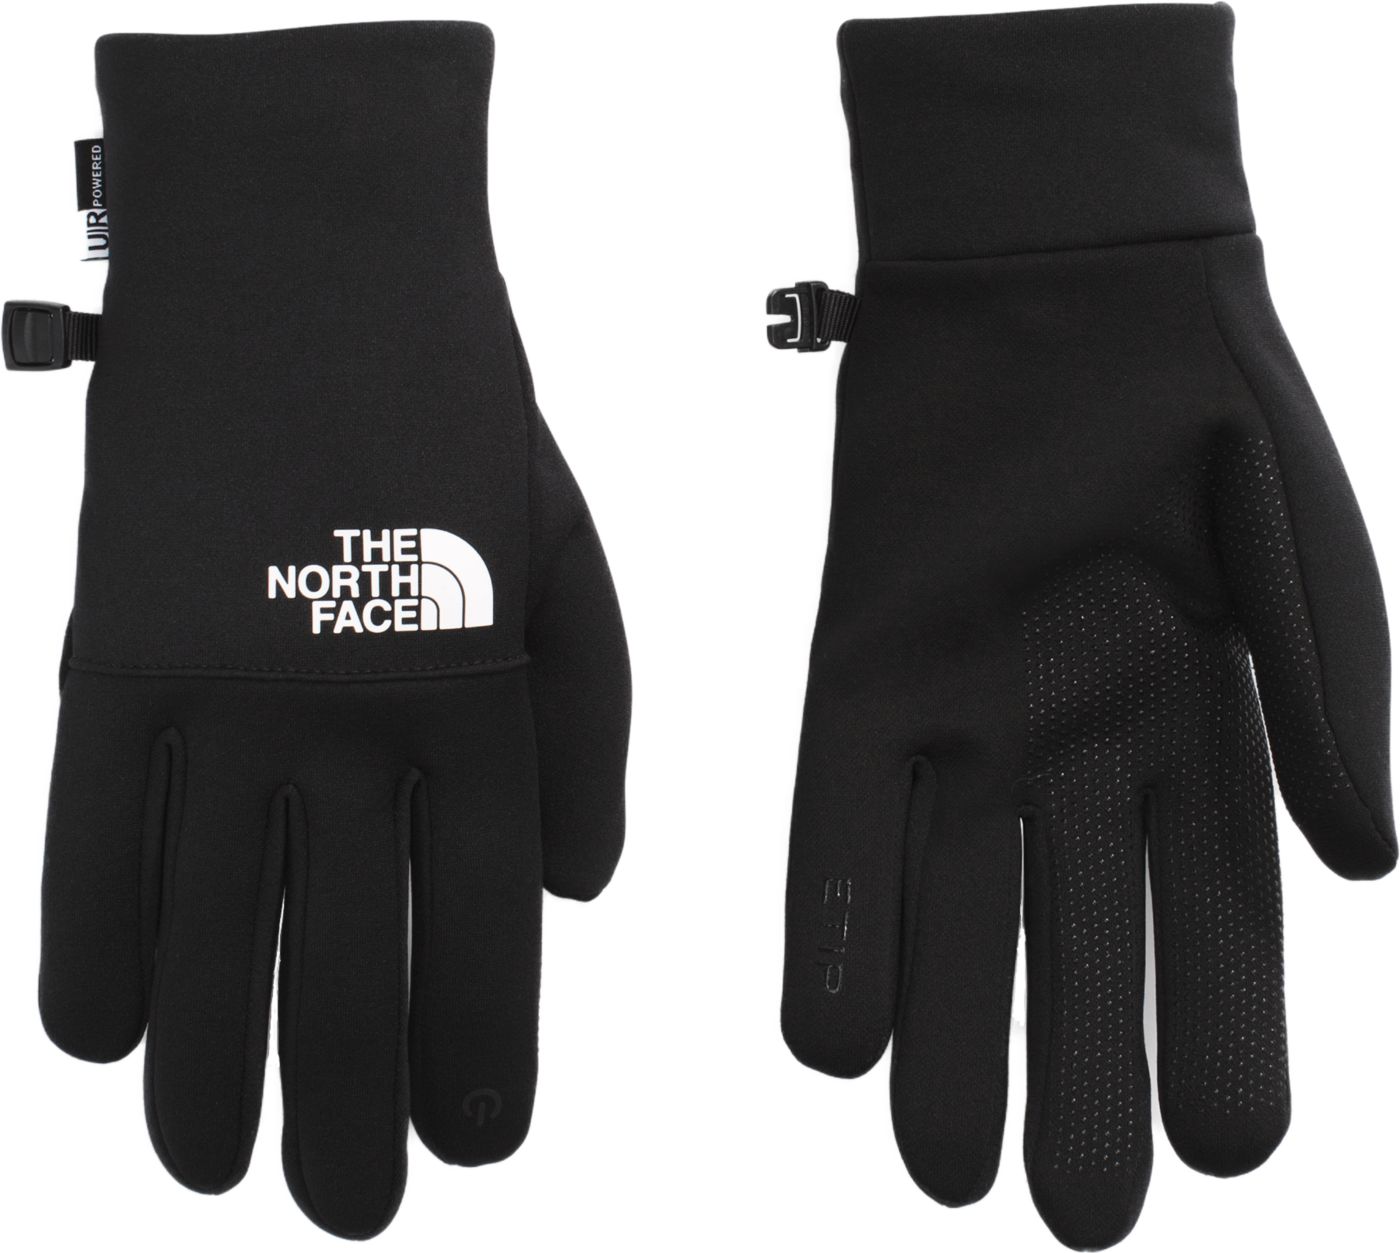 The North Face Men's Etip Recycled Gloves | Field & Stream